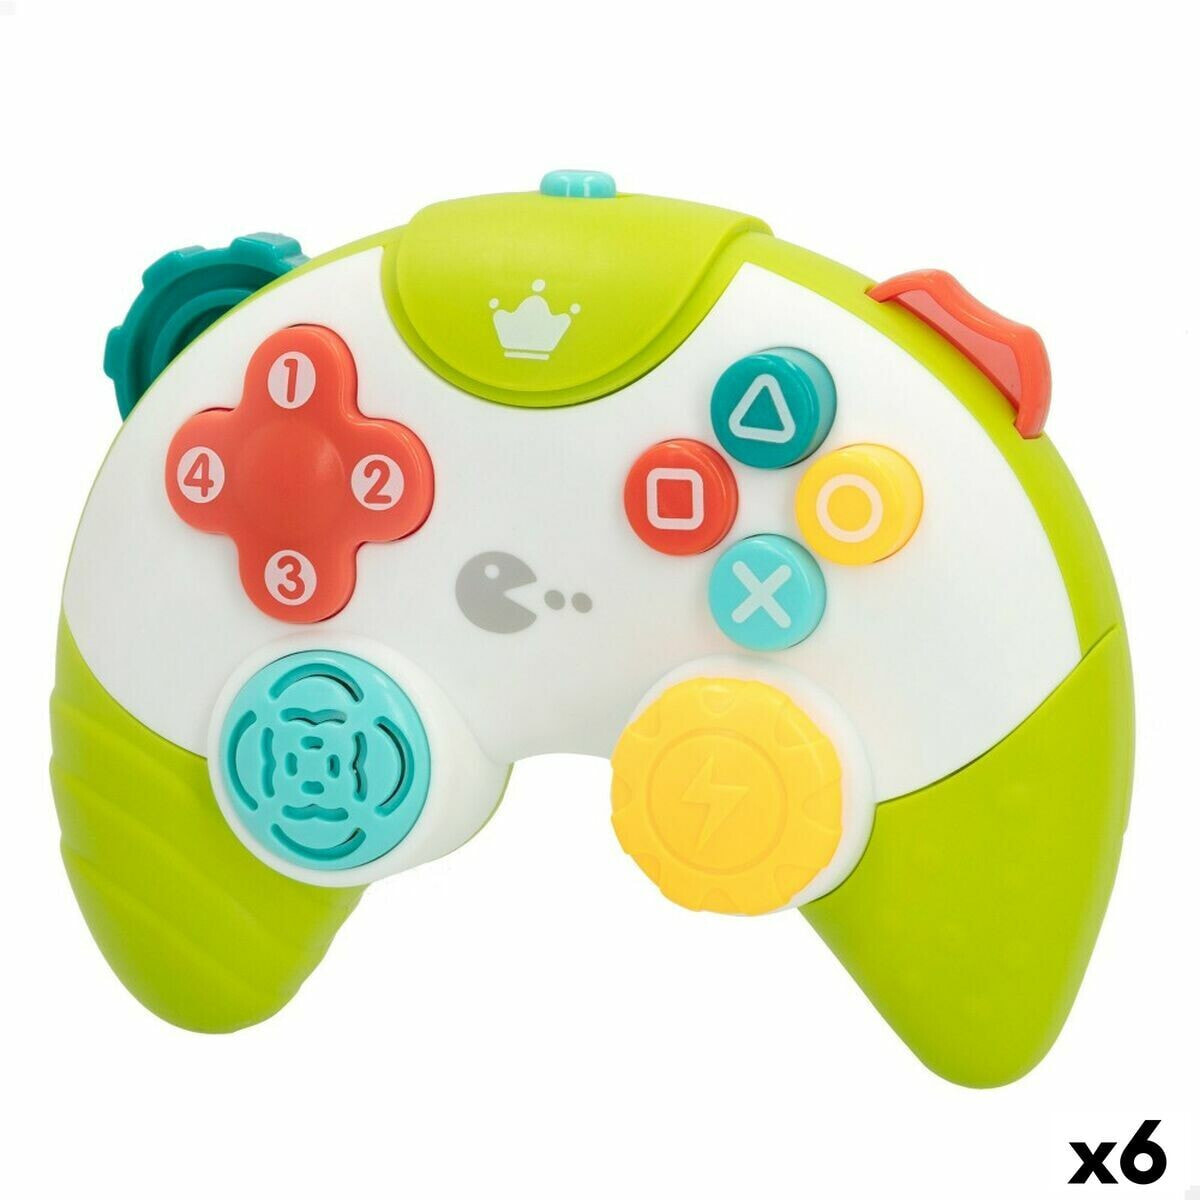 Toy controller Colorbaby Green 15 x 5,5 x 12 cm (6 Units)